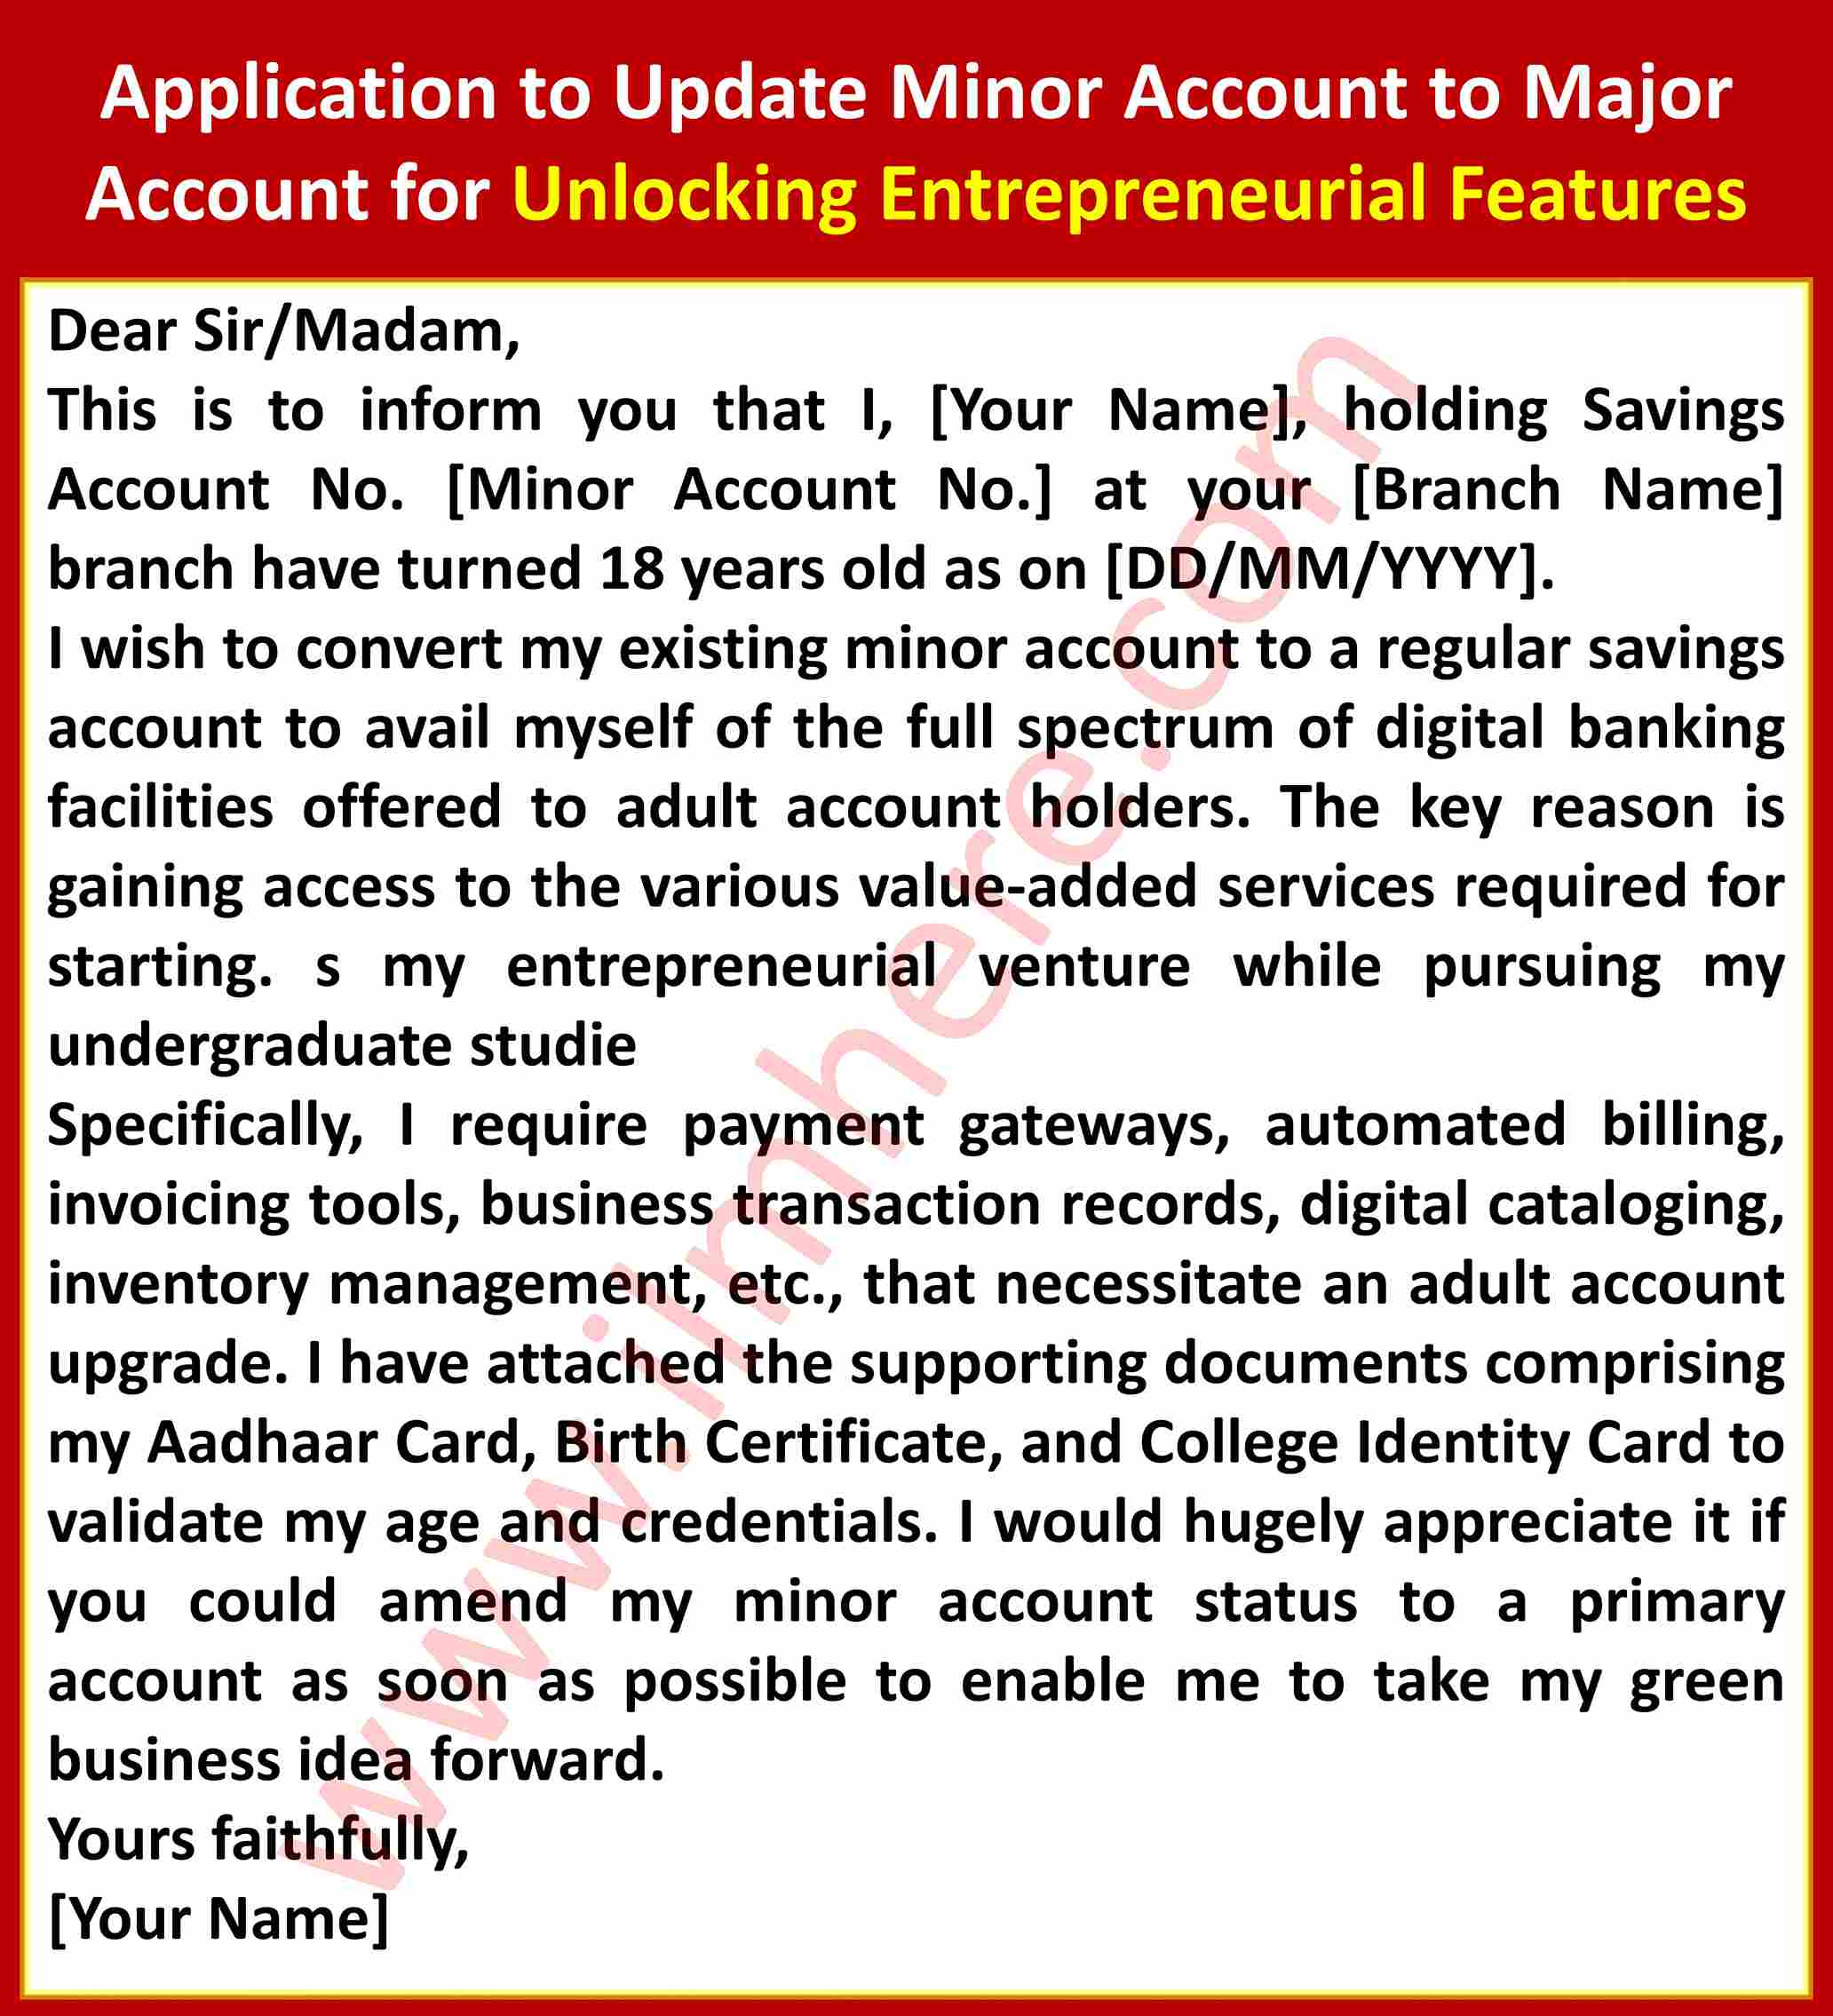 Application to Update Minor Account to Major Account for Unlocking Entrepreneurial Features